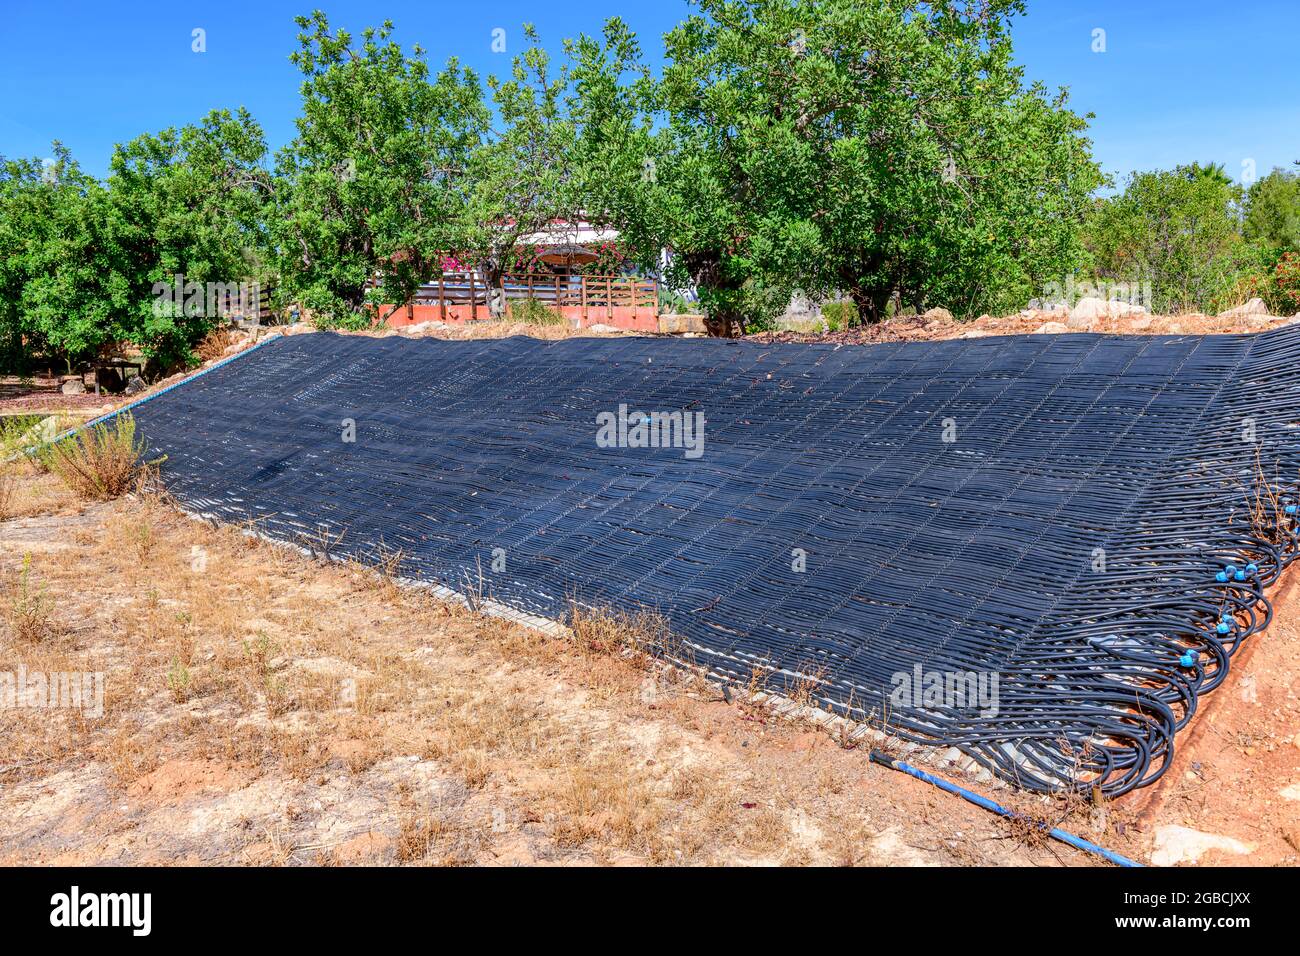 Large array of black pipes used as a solar water heating system for a pool. environmentaly friendly and renewable energy solution situated in a garden Stock Photo